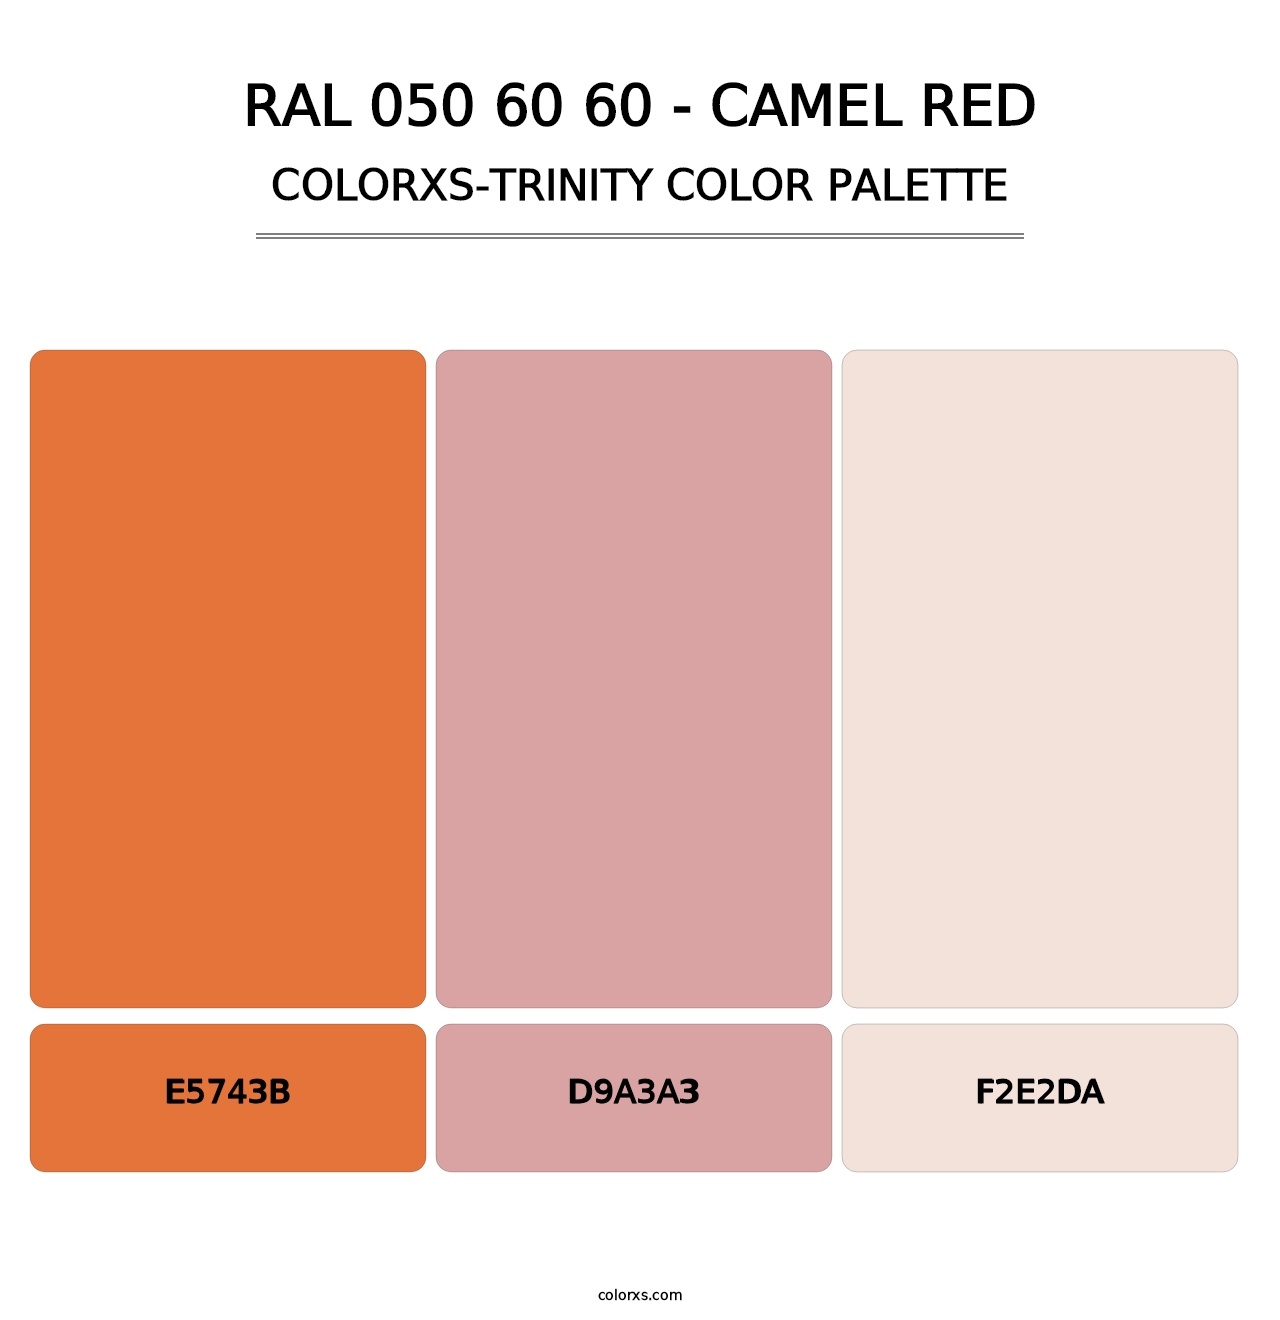 RAL 050 60 60 - Camel Red - Colorxs Trinity Palette